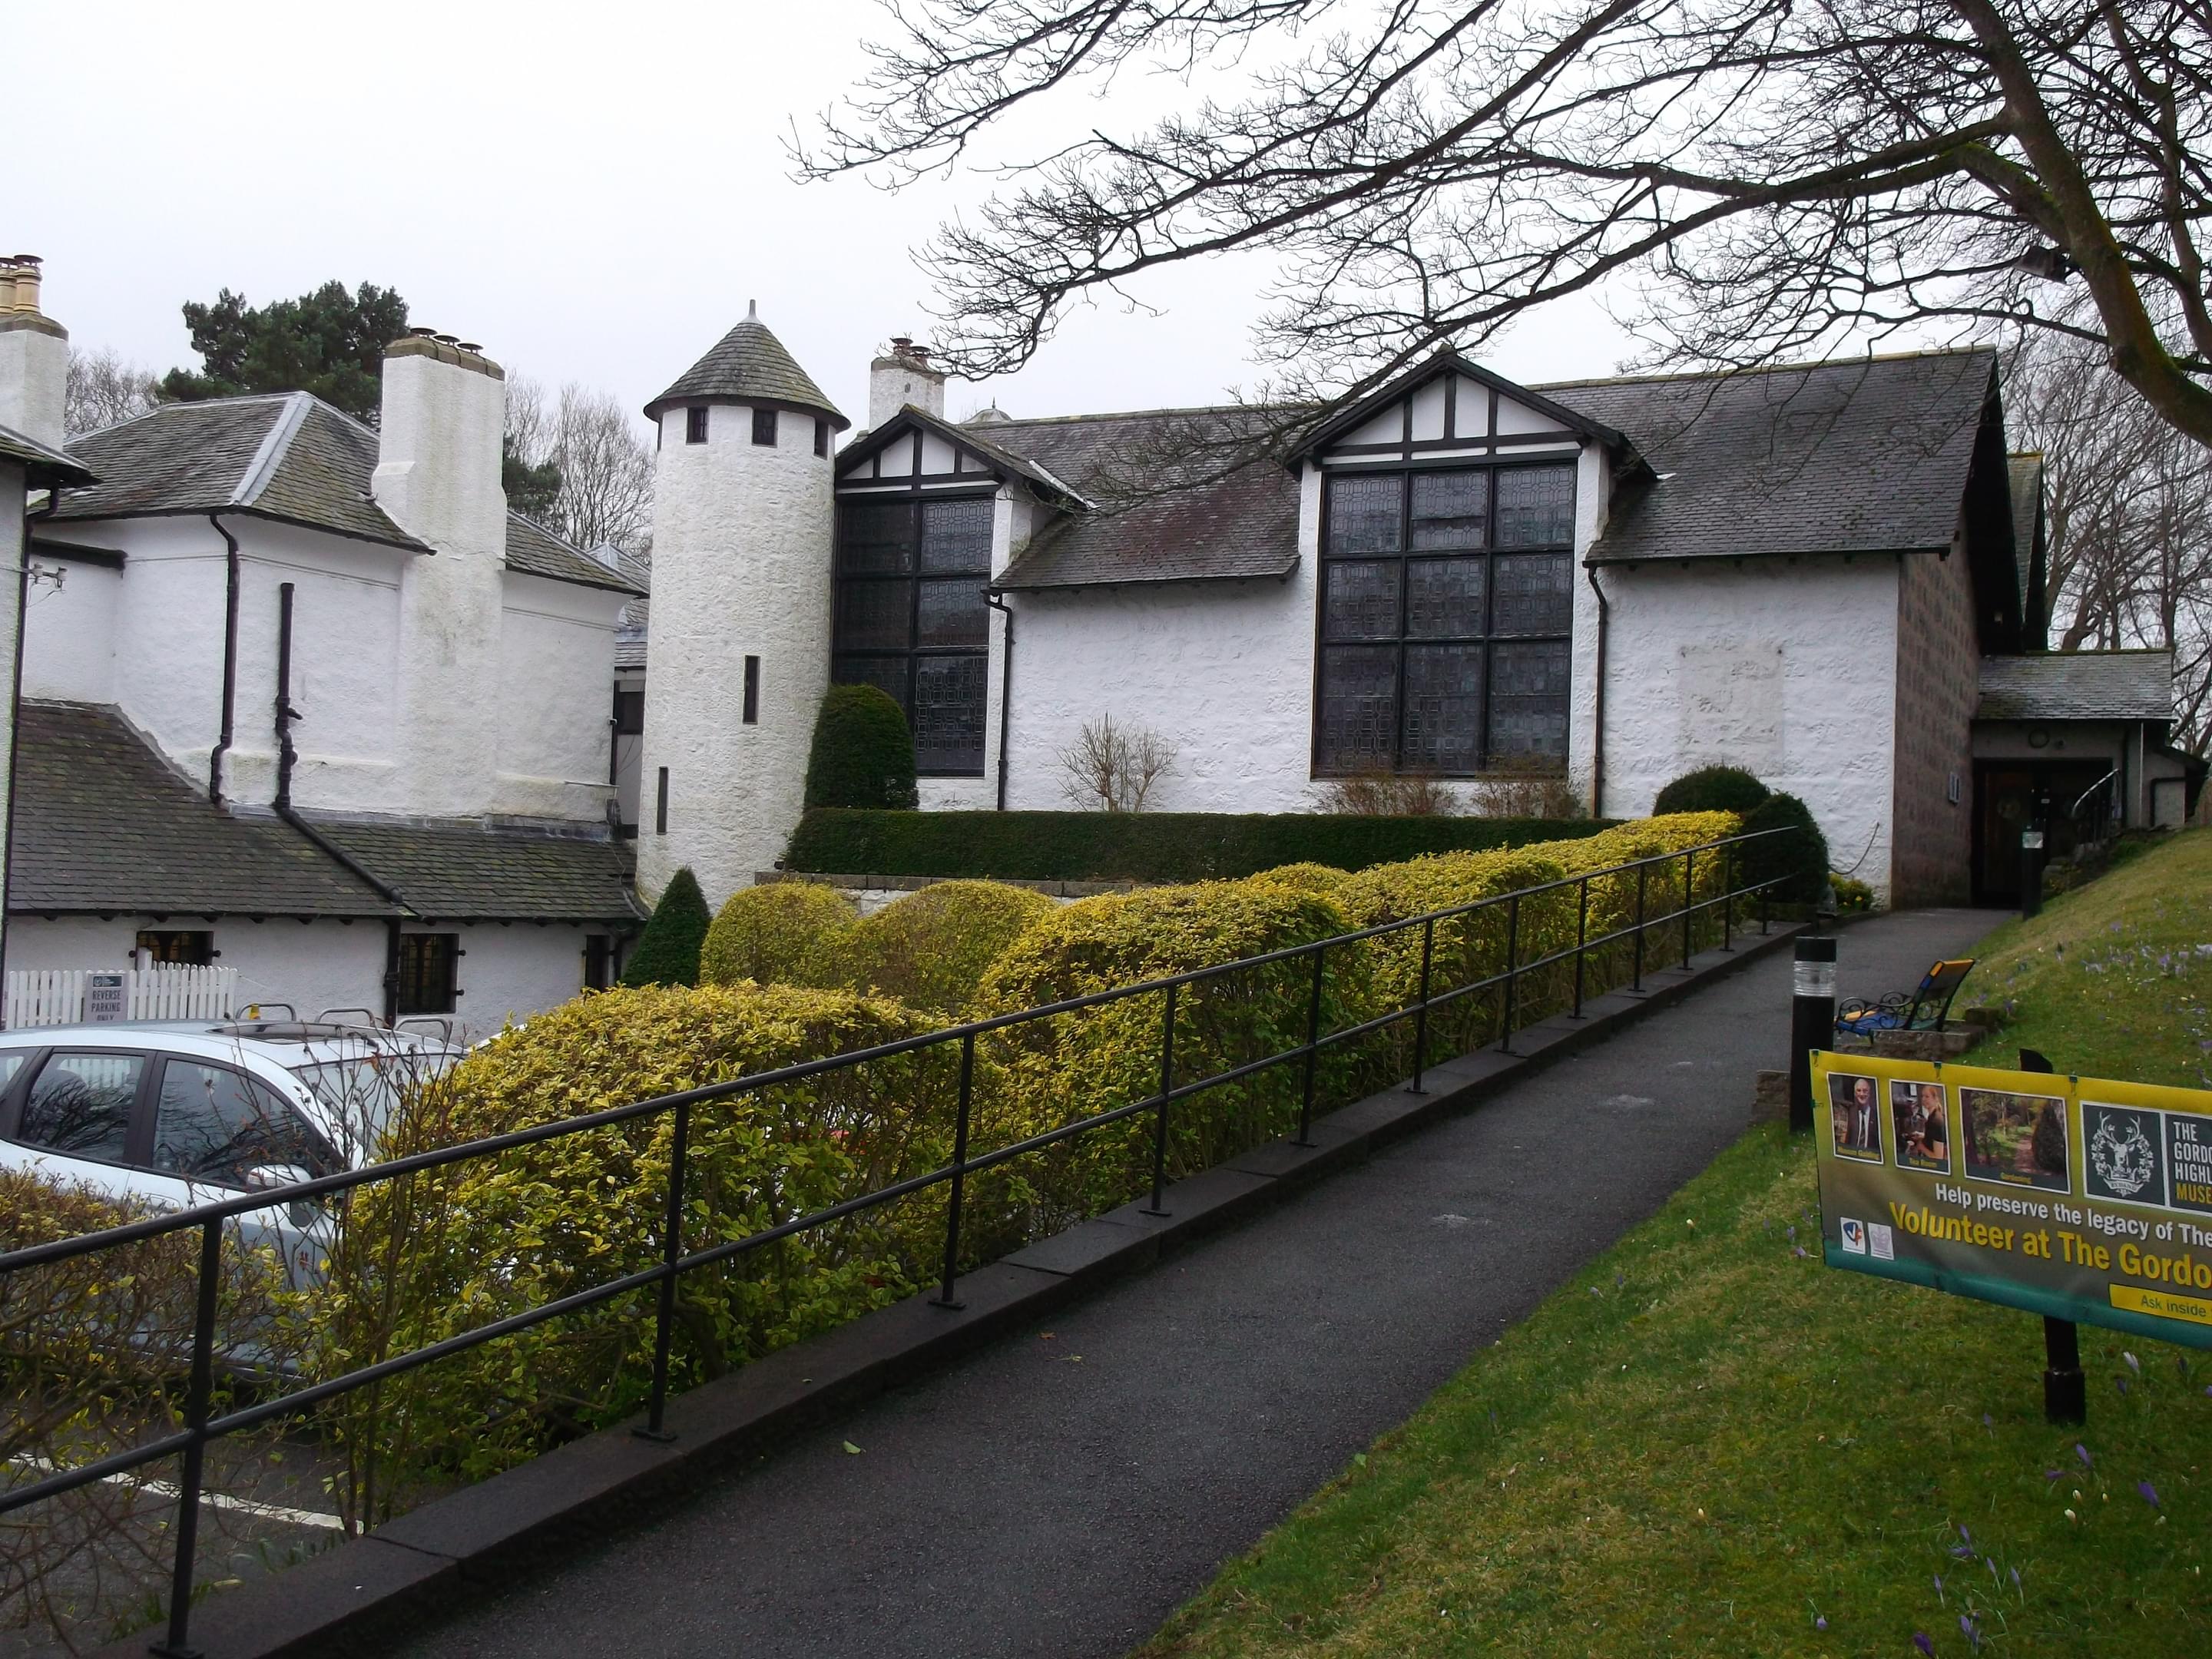 The Gordon Highlanders Museum Overview